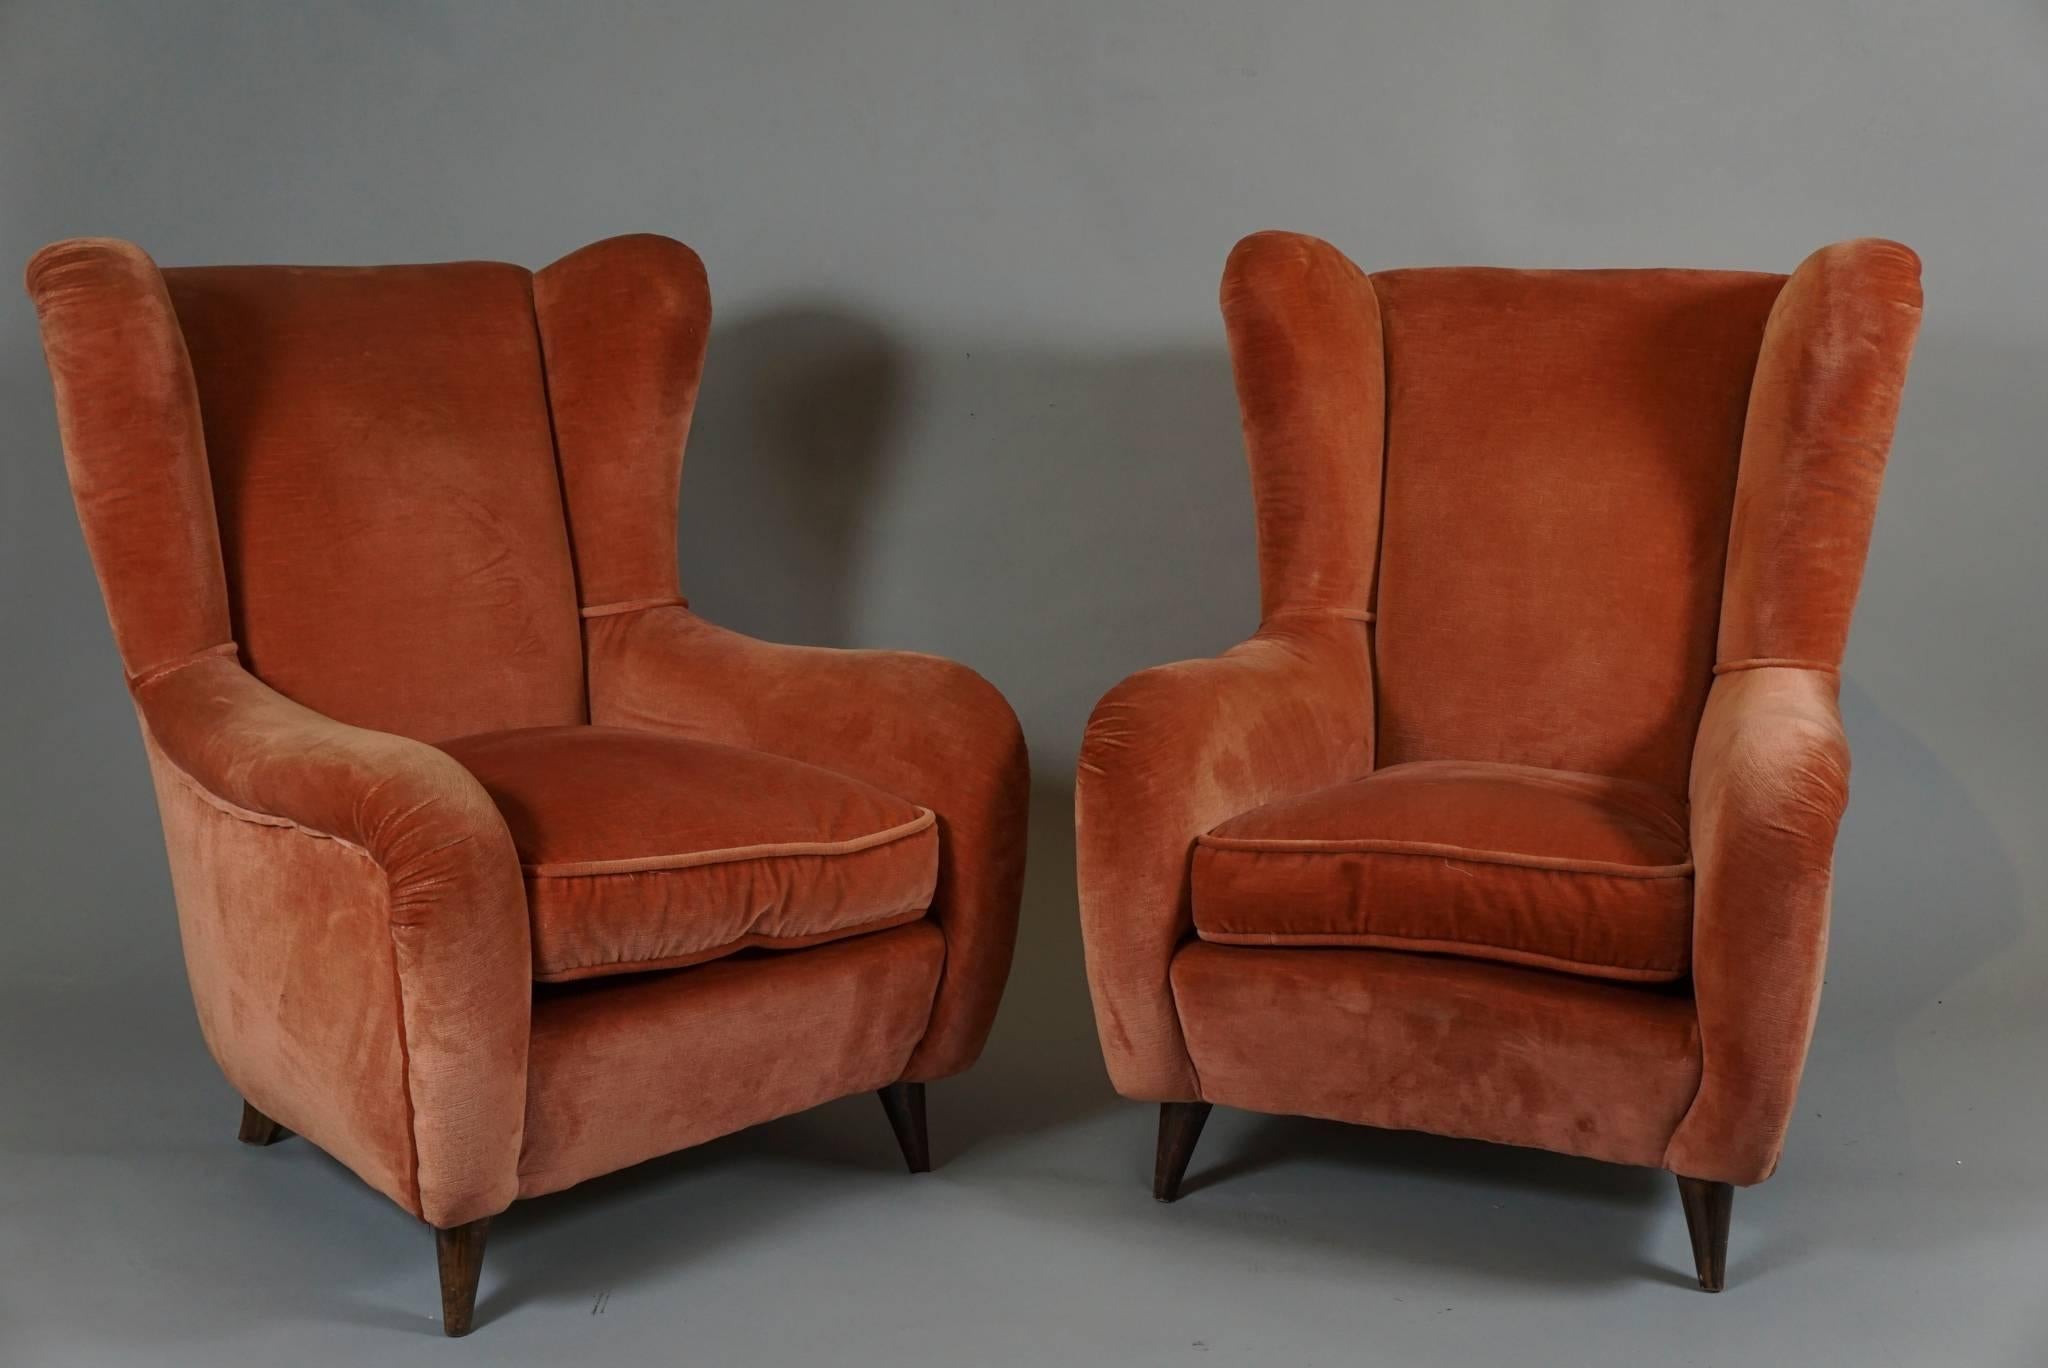 Italian circa 1950 club chairs with rolled arms and shaped wings
deep pink velvet upholstery.